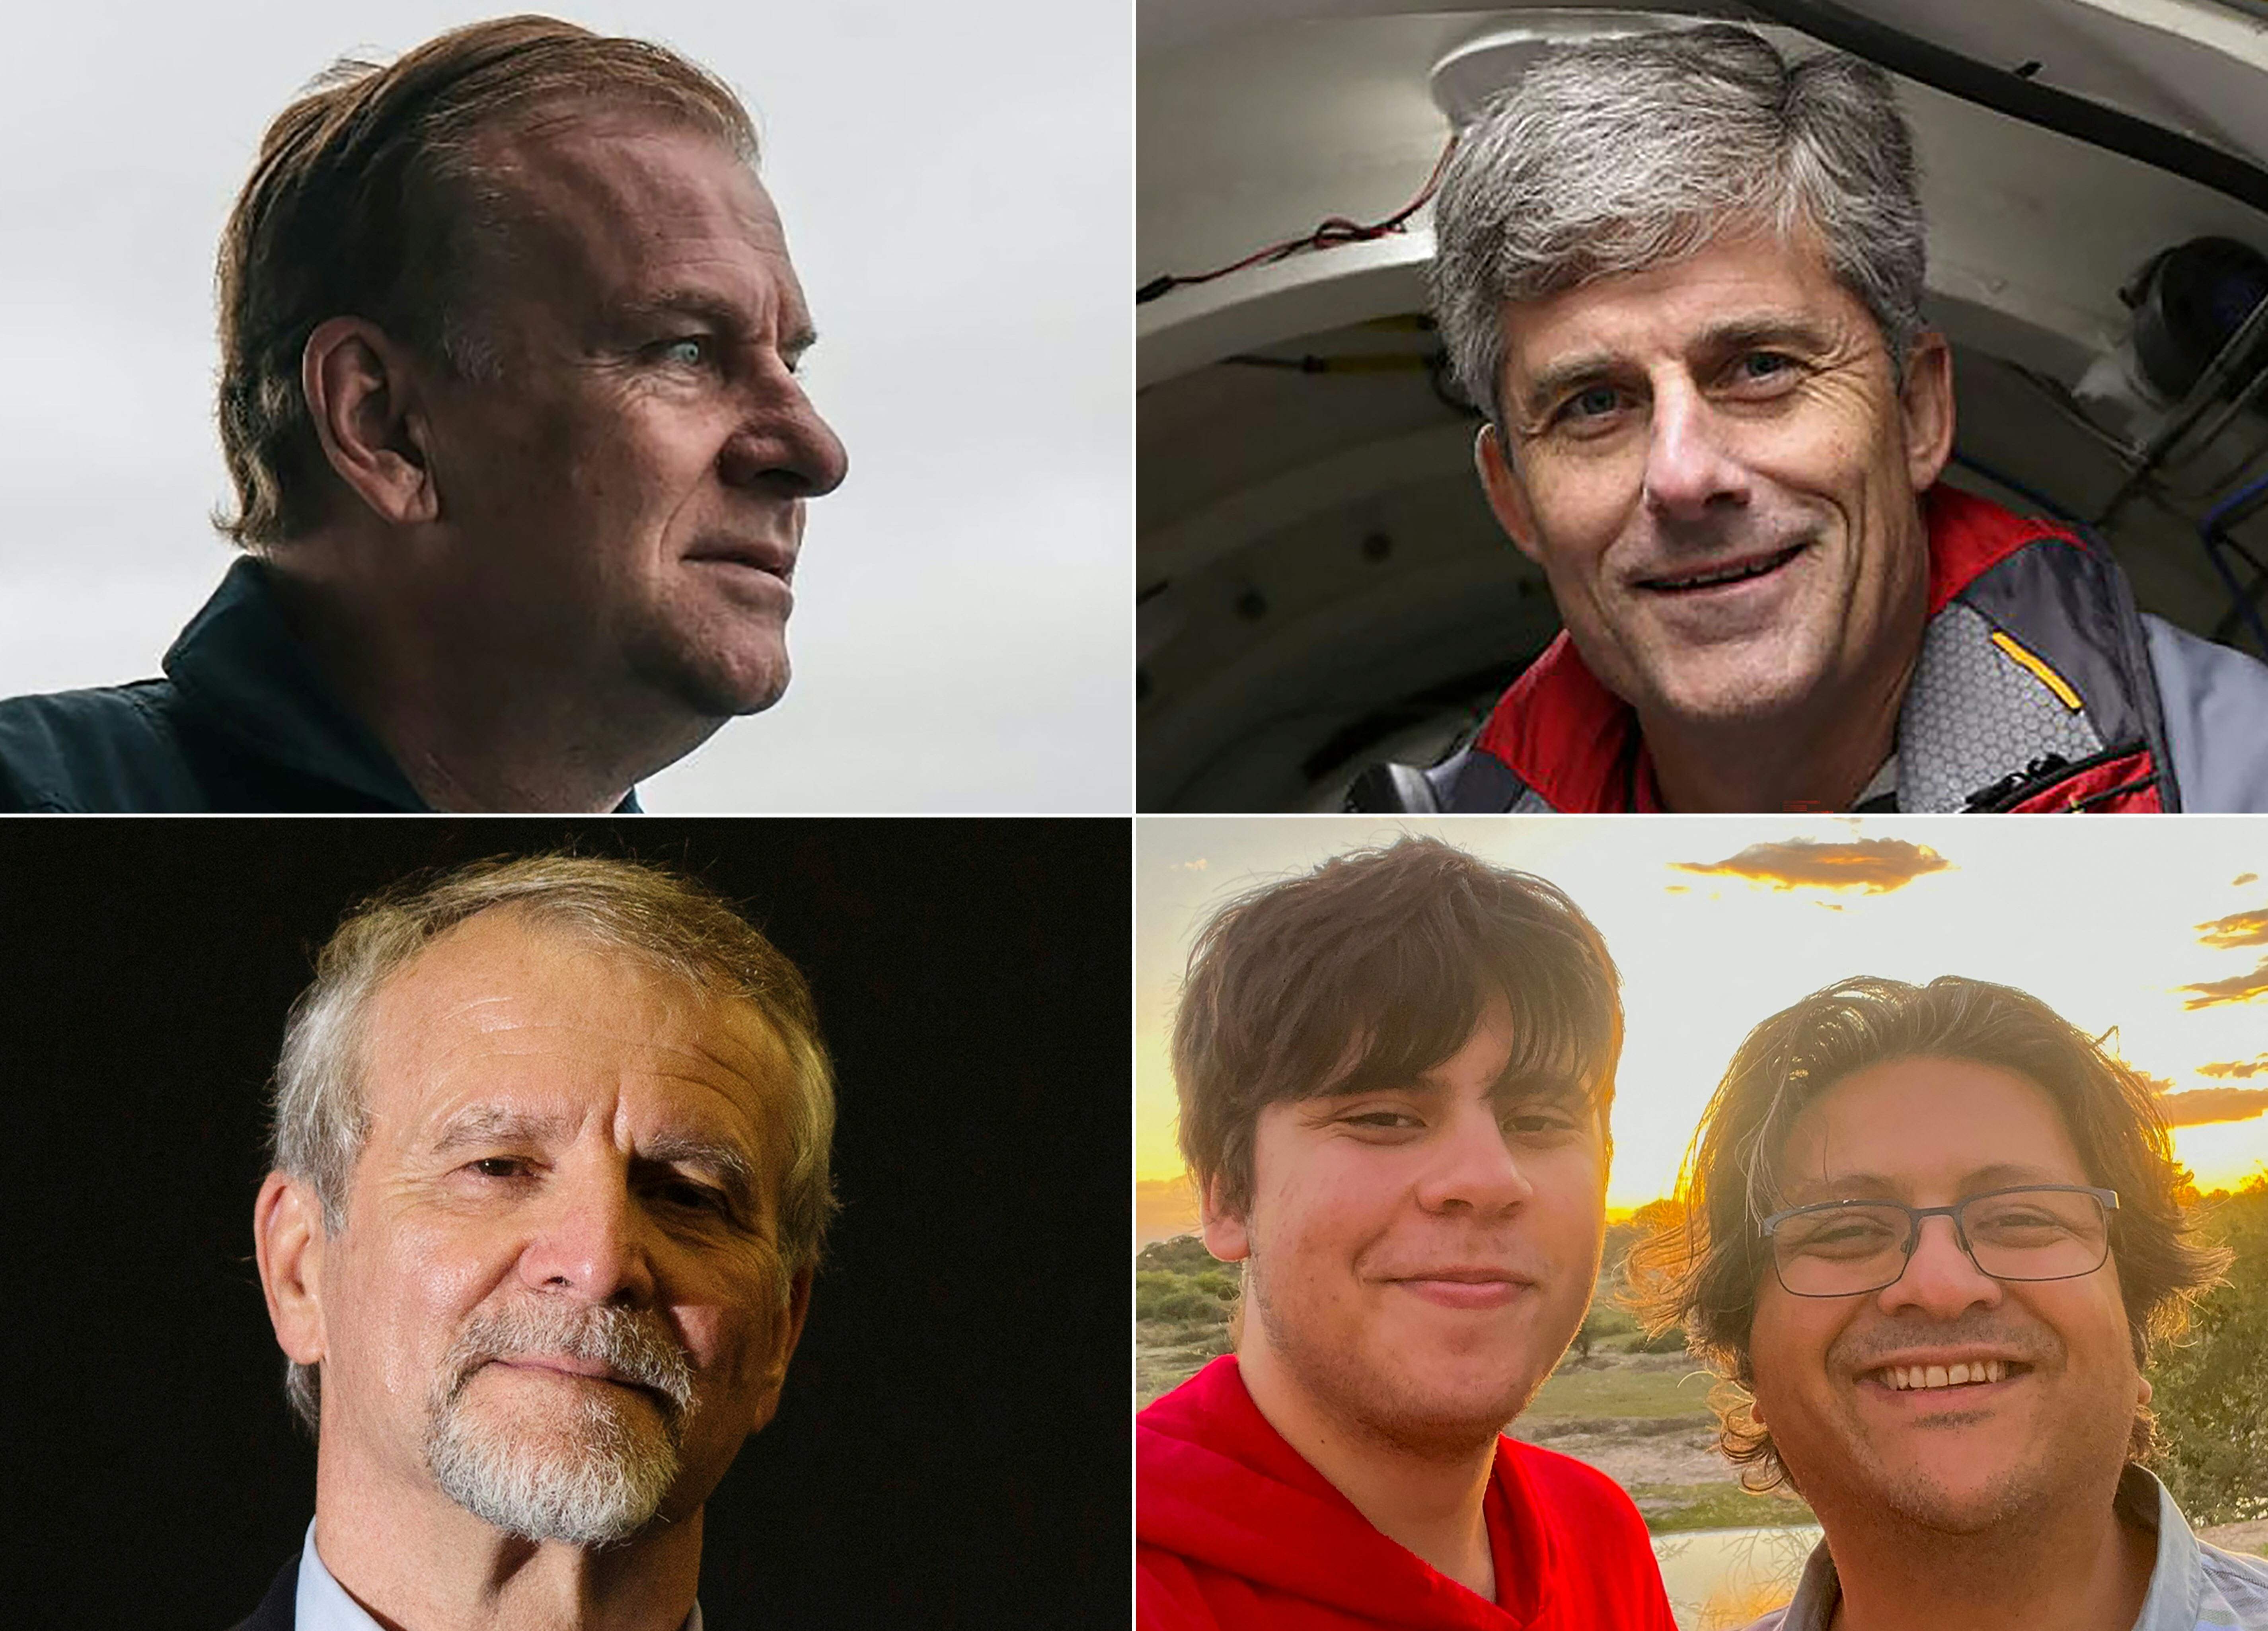 The five crew members confirmed to have died are, clockwise from top left, Hamish Harding, Stockton Rush, Shahzada and Suleman Dawood, and Paul-Henri Nargeolet